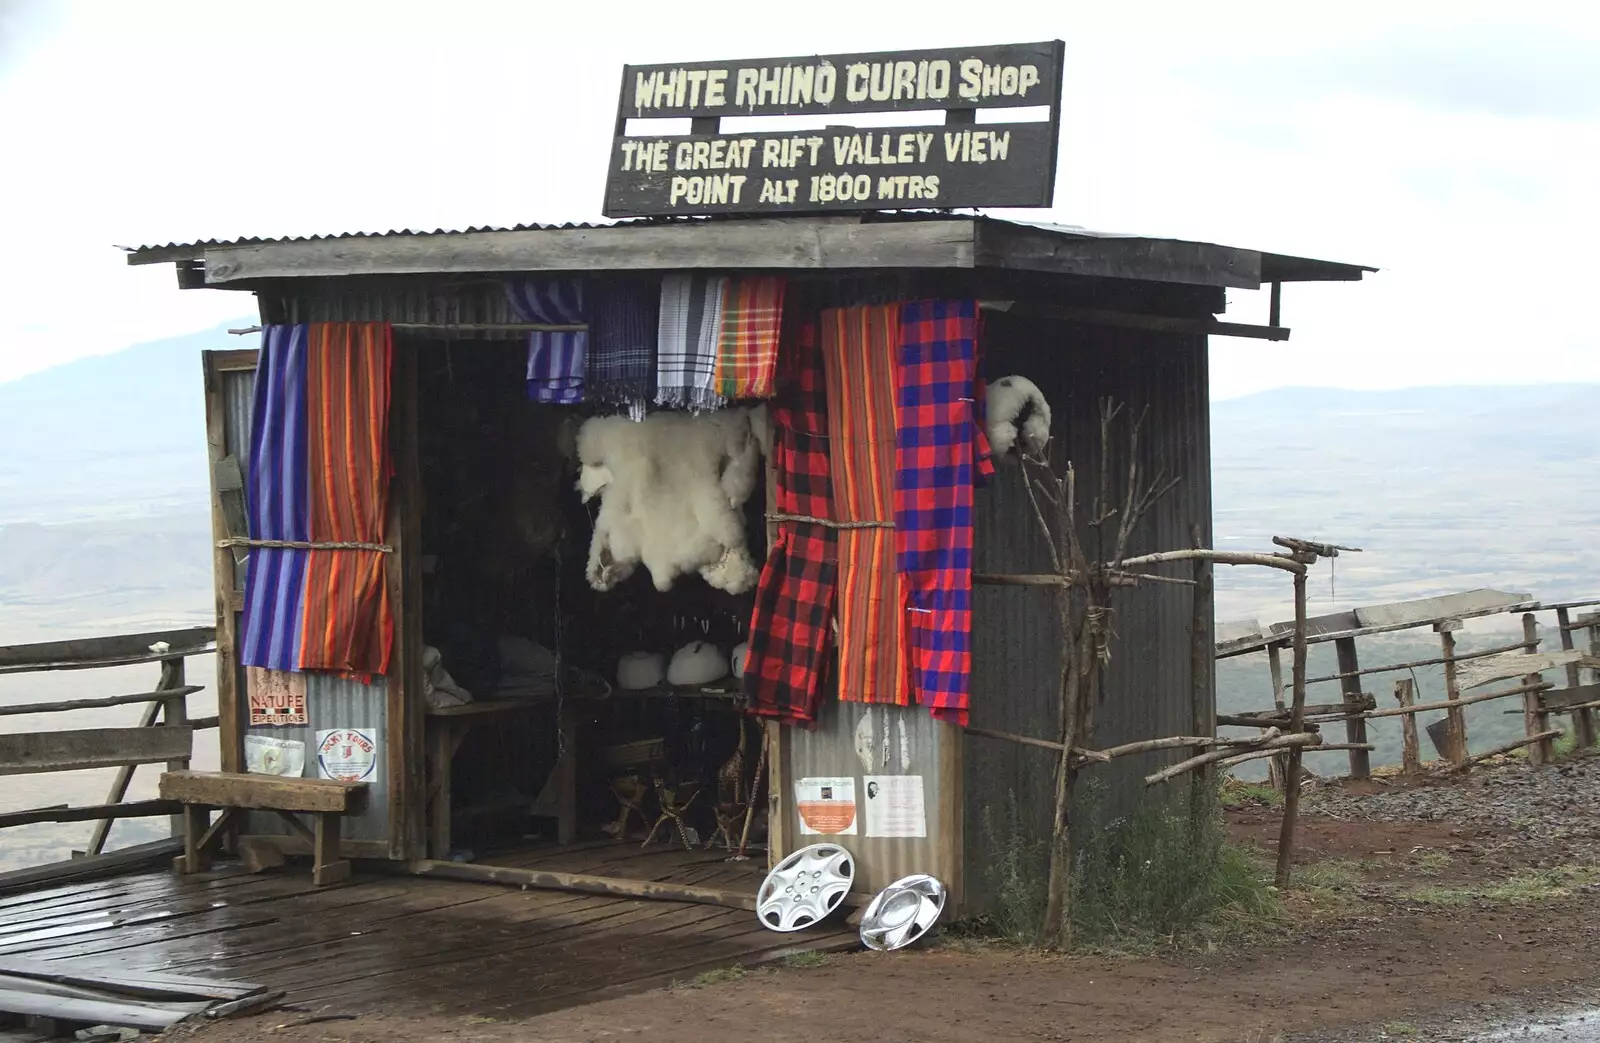 The White Rhino Curio shop on the top of a cliff, from Nairobi and the Road to Maasai Mara, Kenya, Africa - 1st November 2010